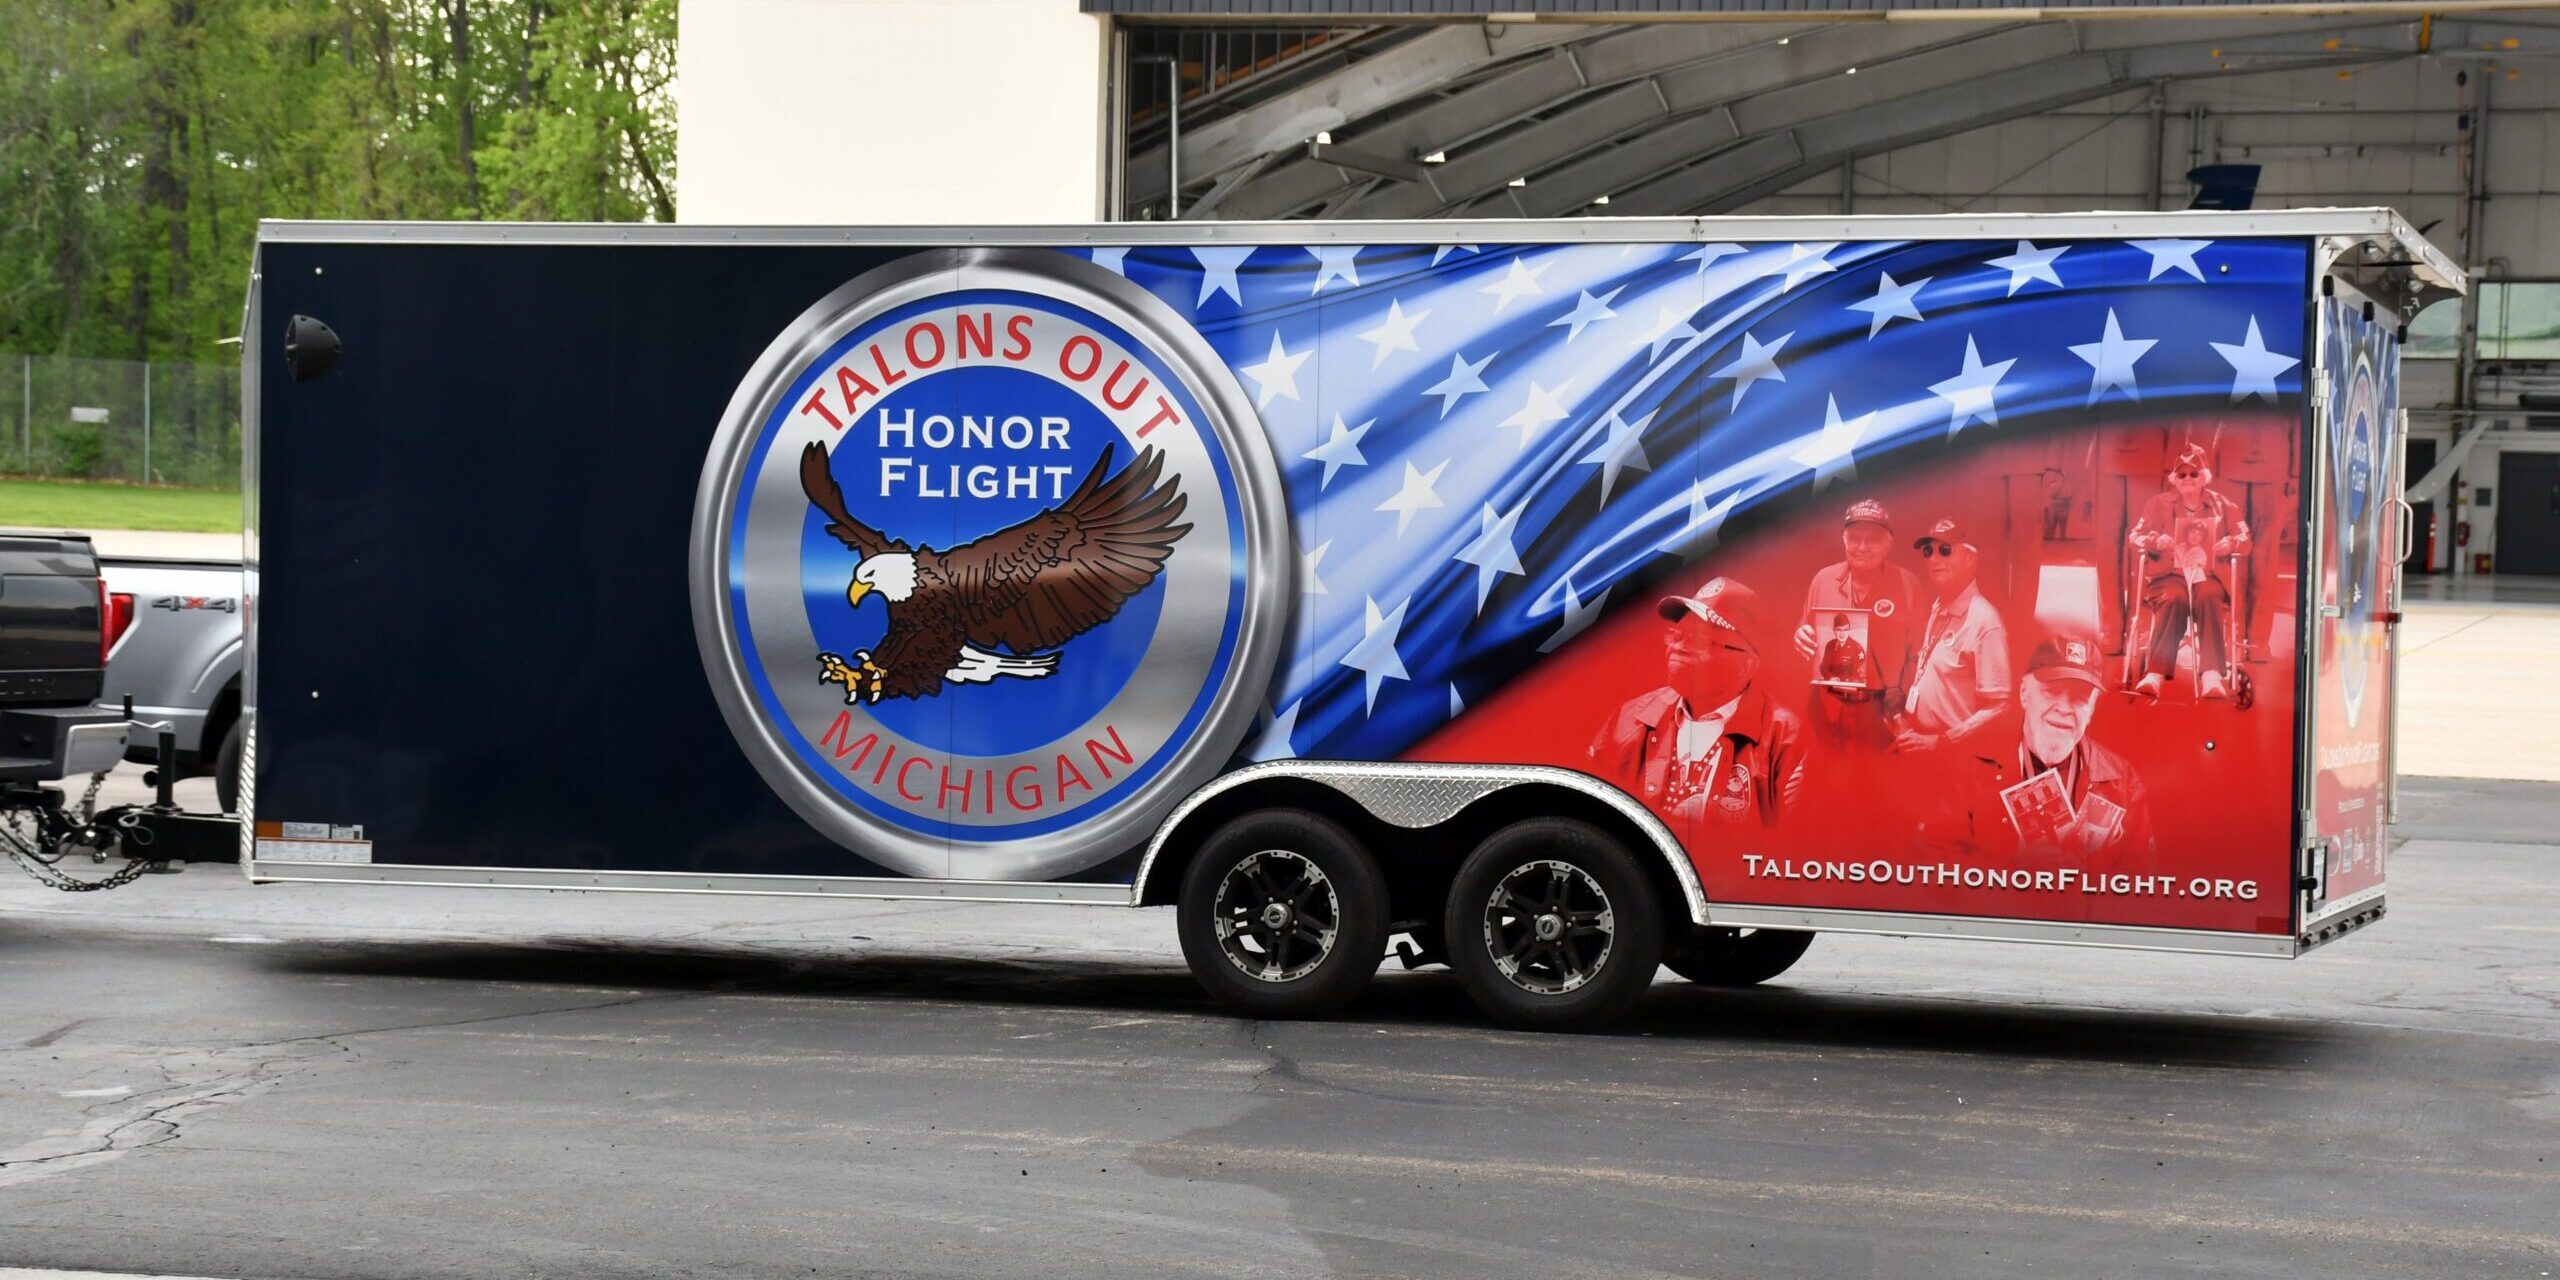 A large rectangular trailer with an eagle and American flag painted on the side.